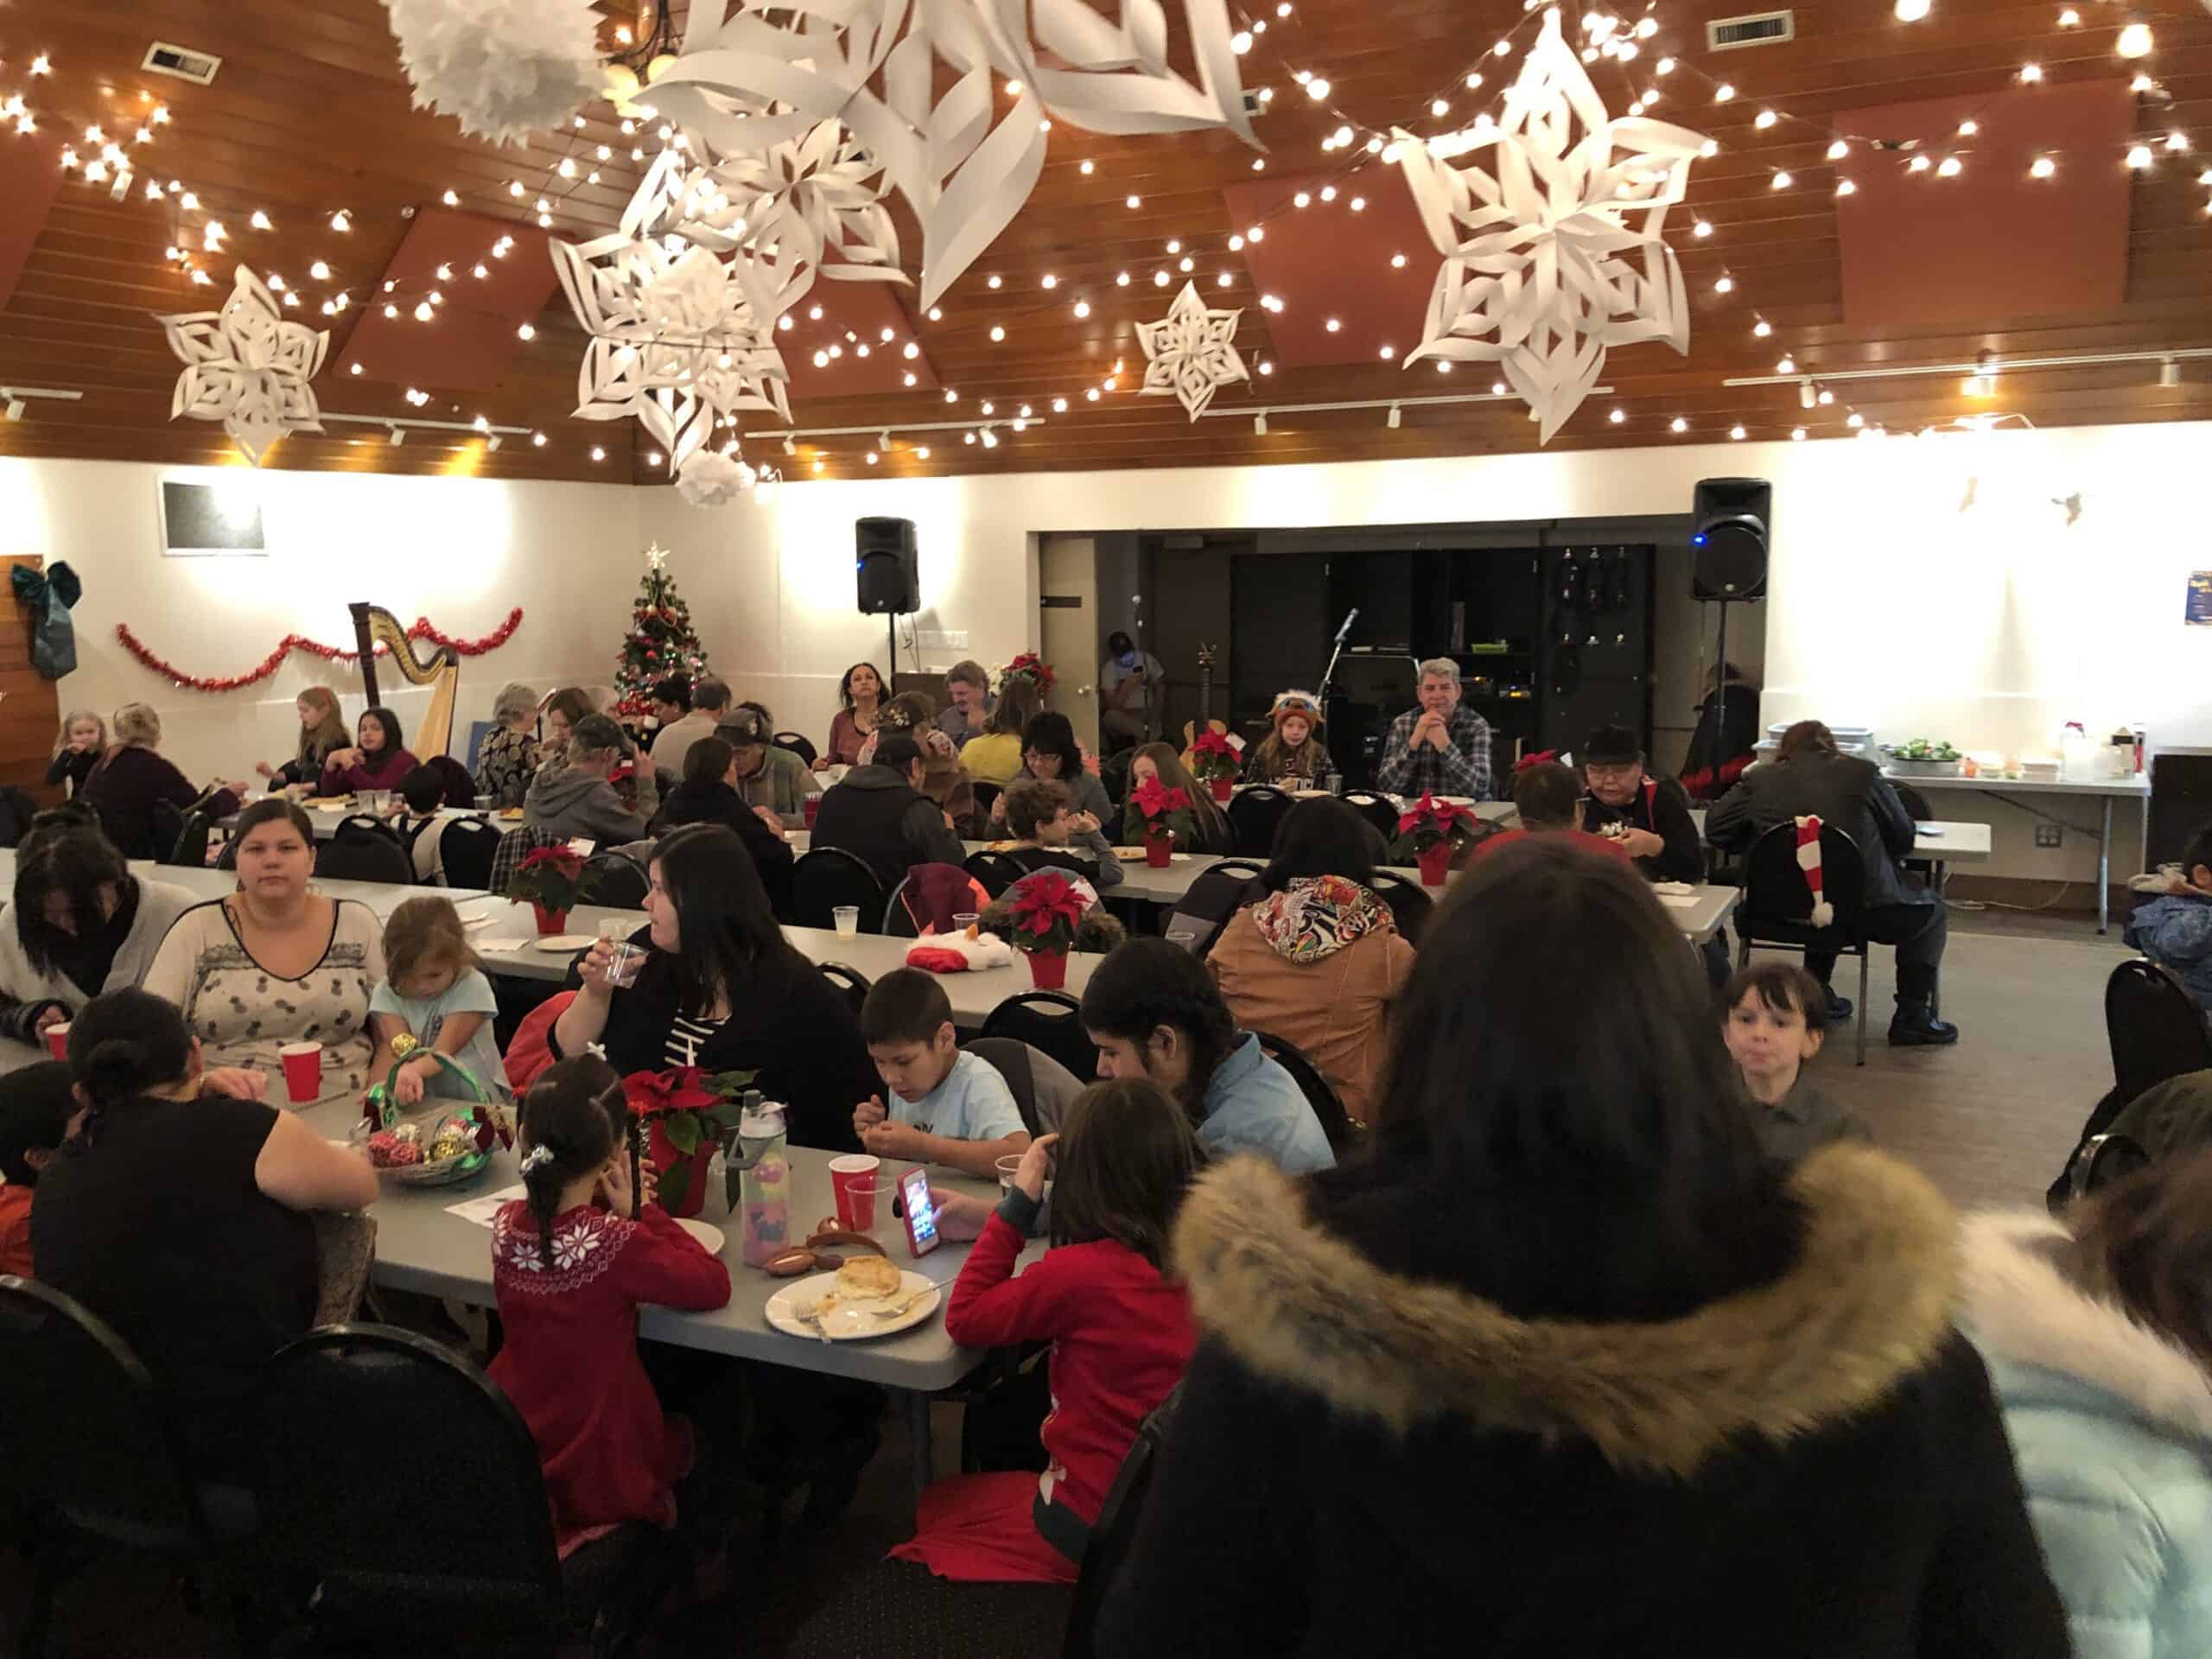 Local groups rethink holiday gatherings